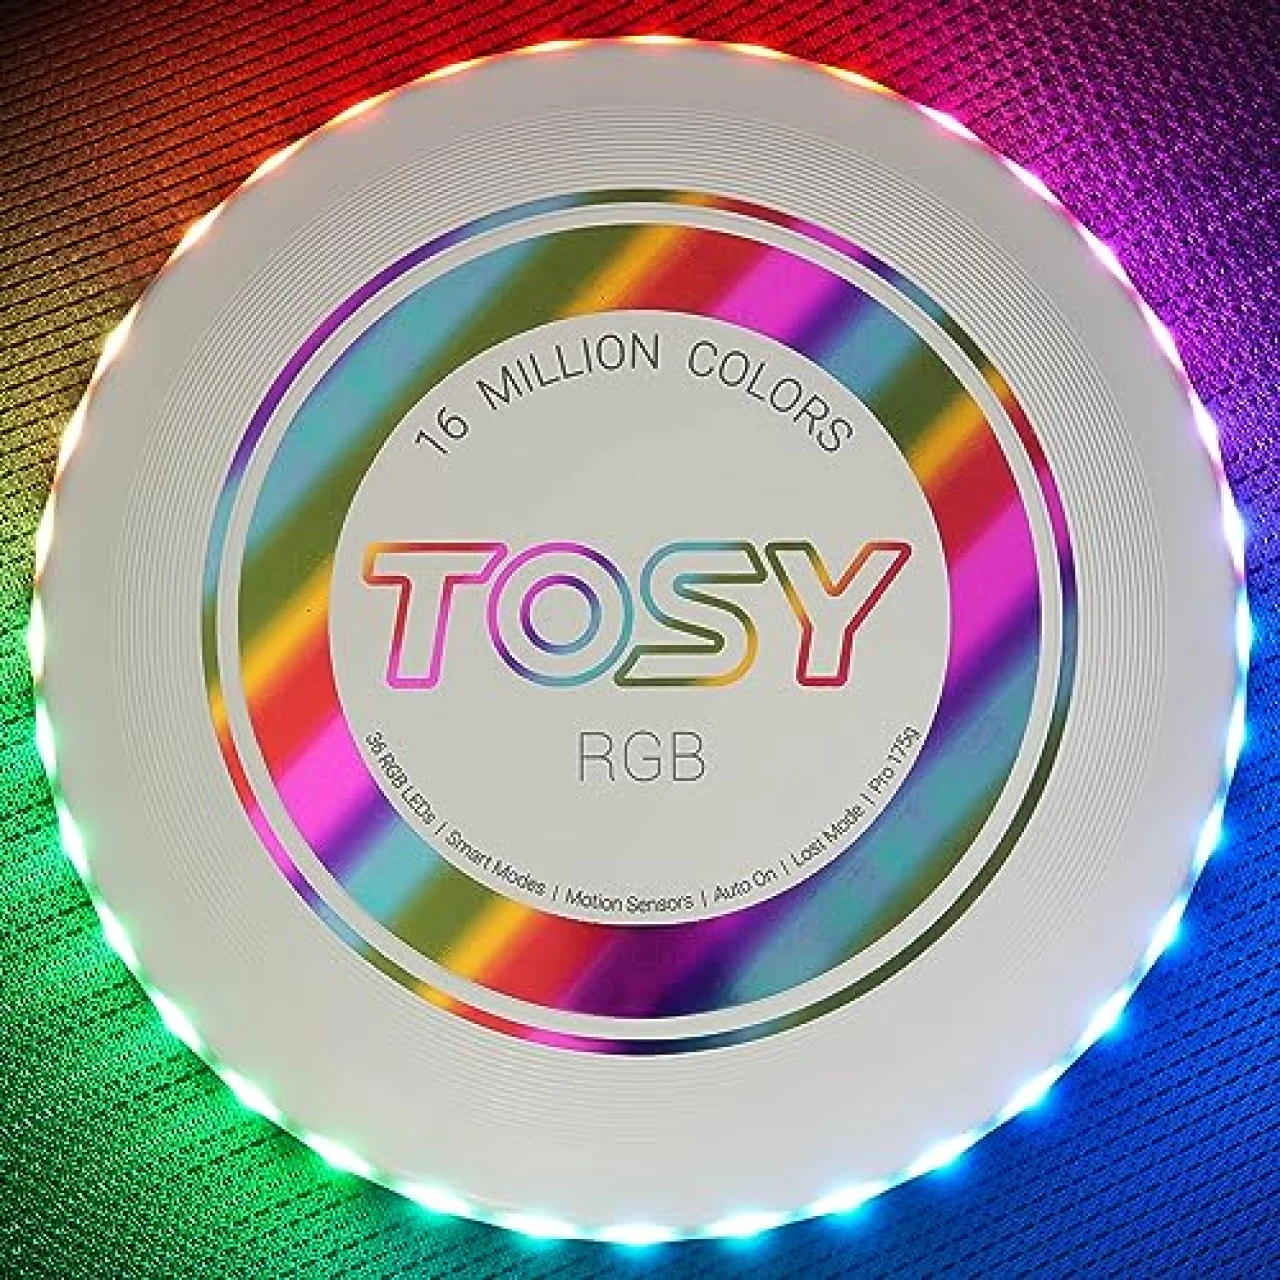 TOSY Flying Disc - 16 Million Color RGB or 36 or 360 LEDs, Extremely Bright, Smart Modes, Auto Light Up, Rechargeable, Perfect Birthday &amp; Camping Gift for Men/Boys/Teens/Kids, 175g frisbees